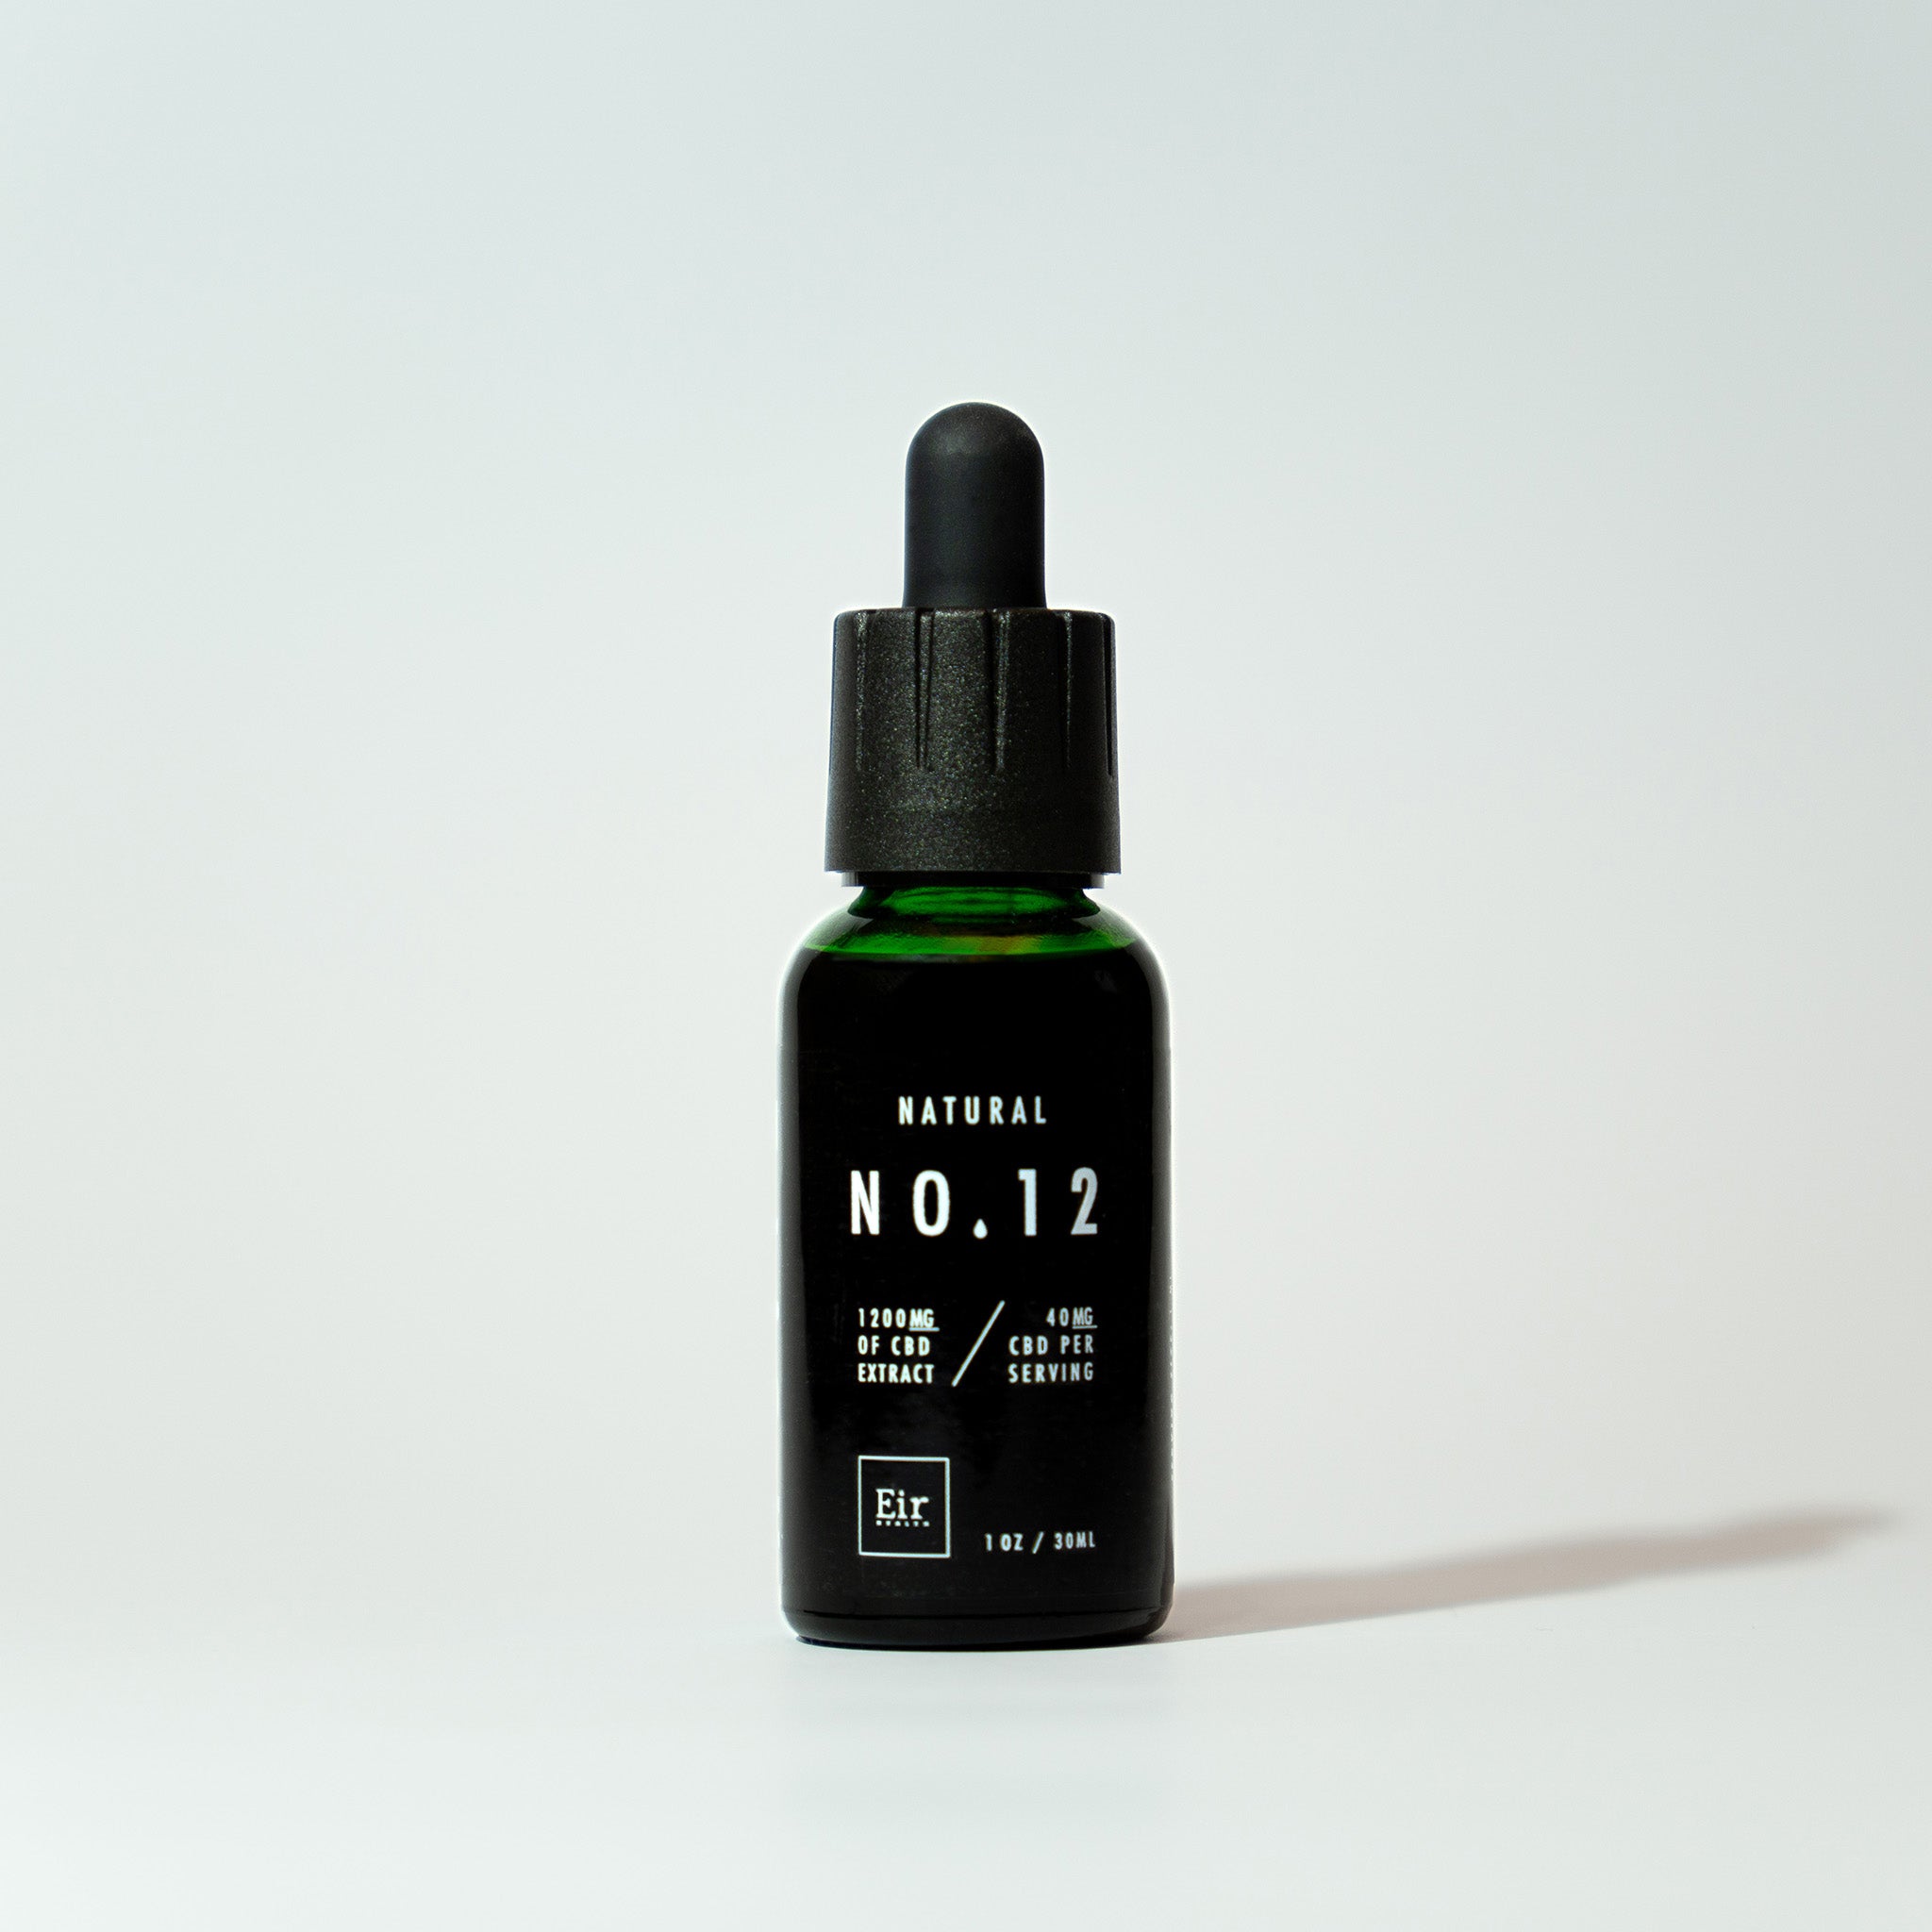 A green bottle of Eir Natural No. 12 oil with a black dropper, labeled with information of 1200 mg CBD, set against a uniform white background.